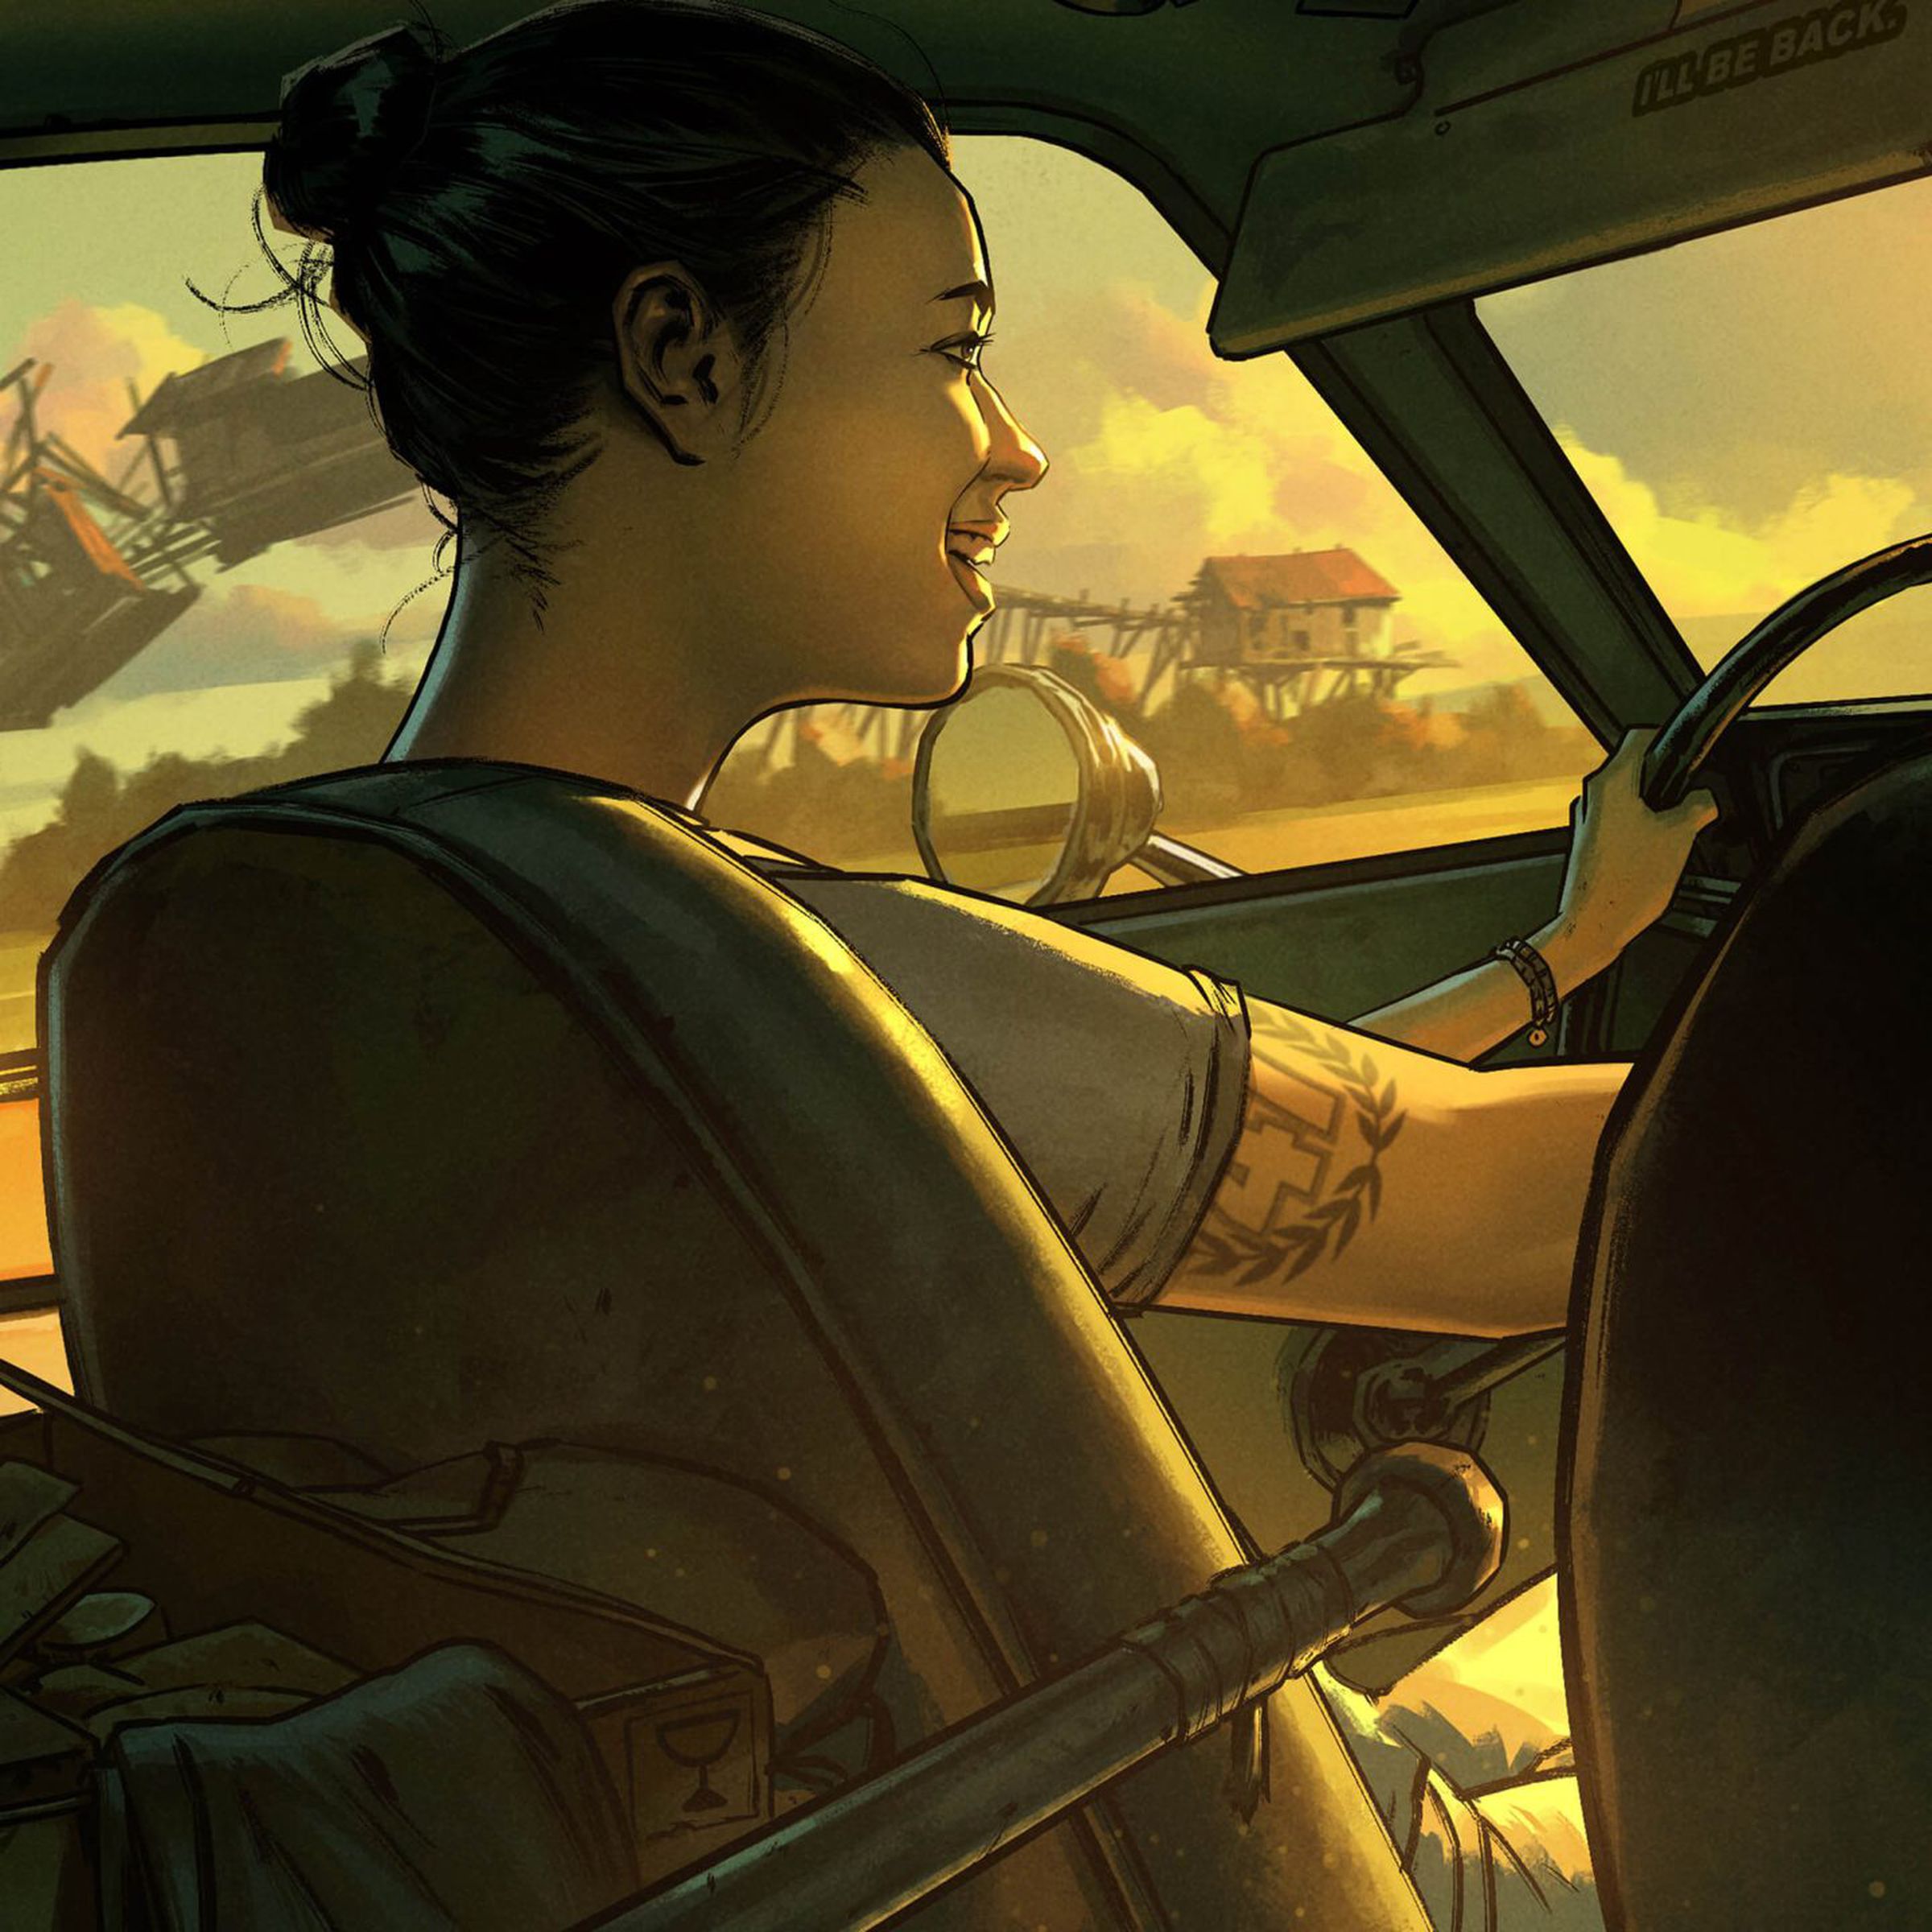 Key art from Blank’s new, as yet unnamed game featuring a woman with a tattoo smiling as she drives a car through what looks to be a desert.